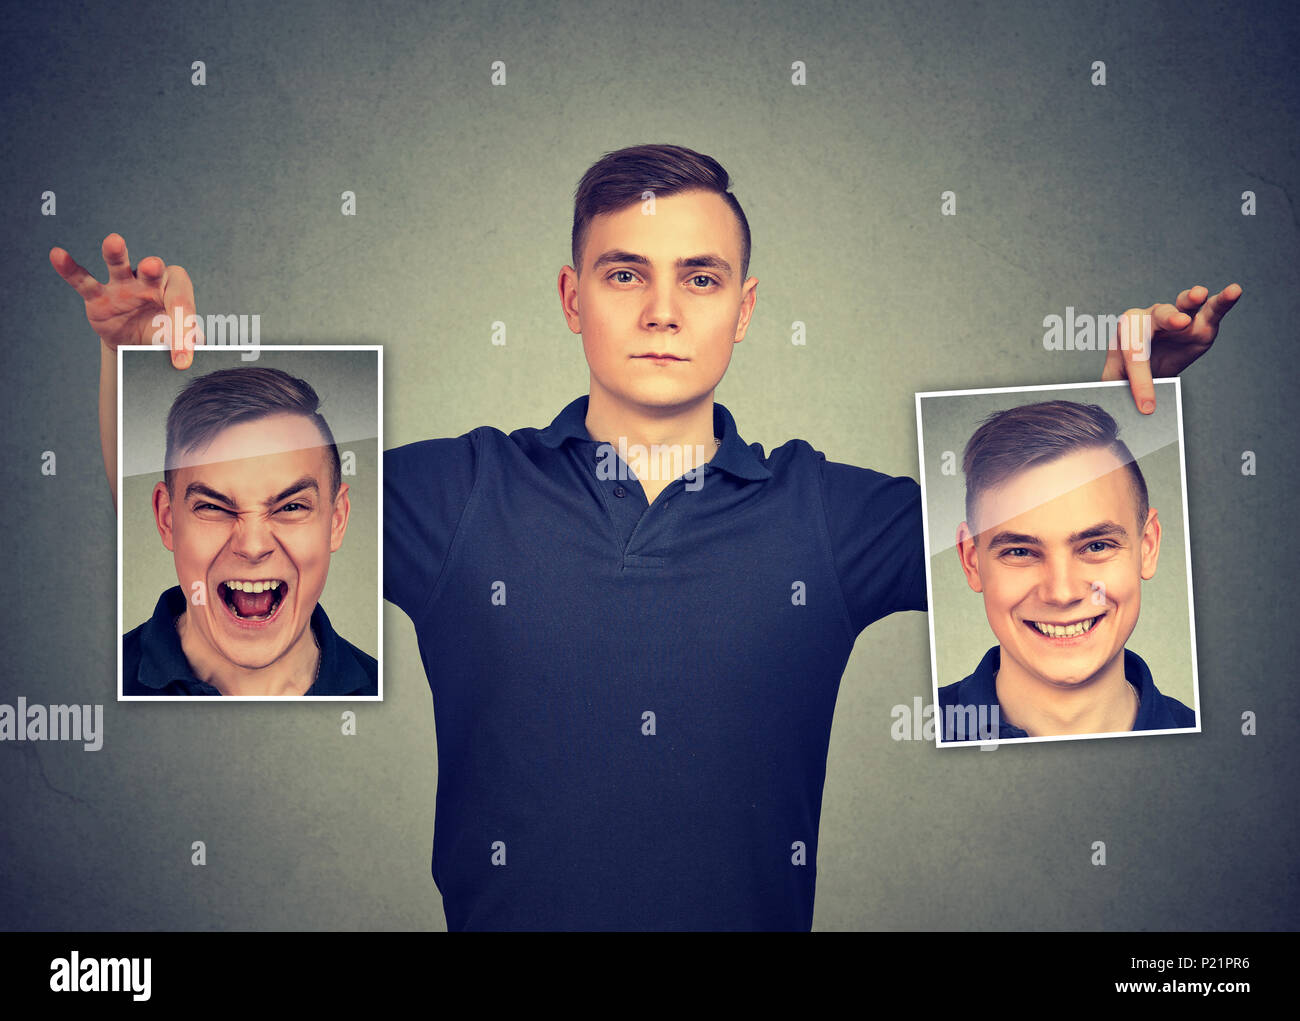 Serious man holding two different face emotion masks of himself Stock Photo